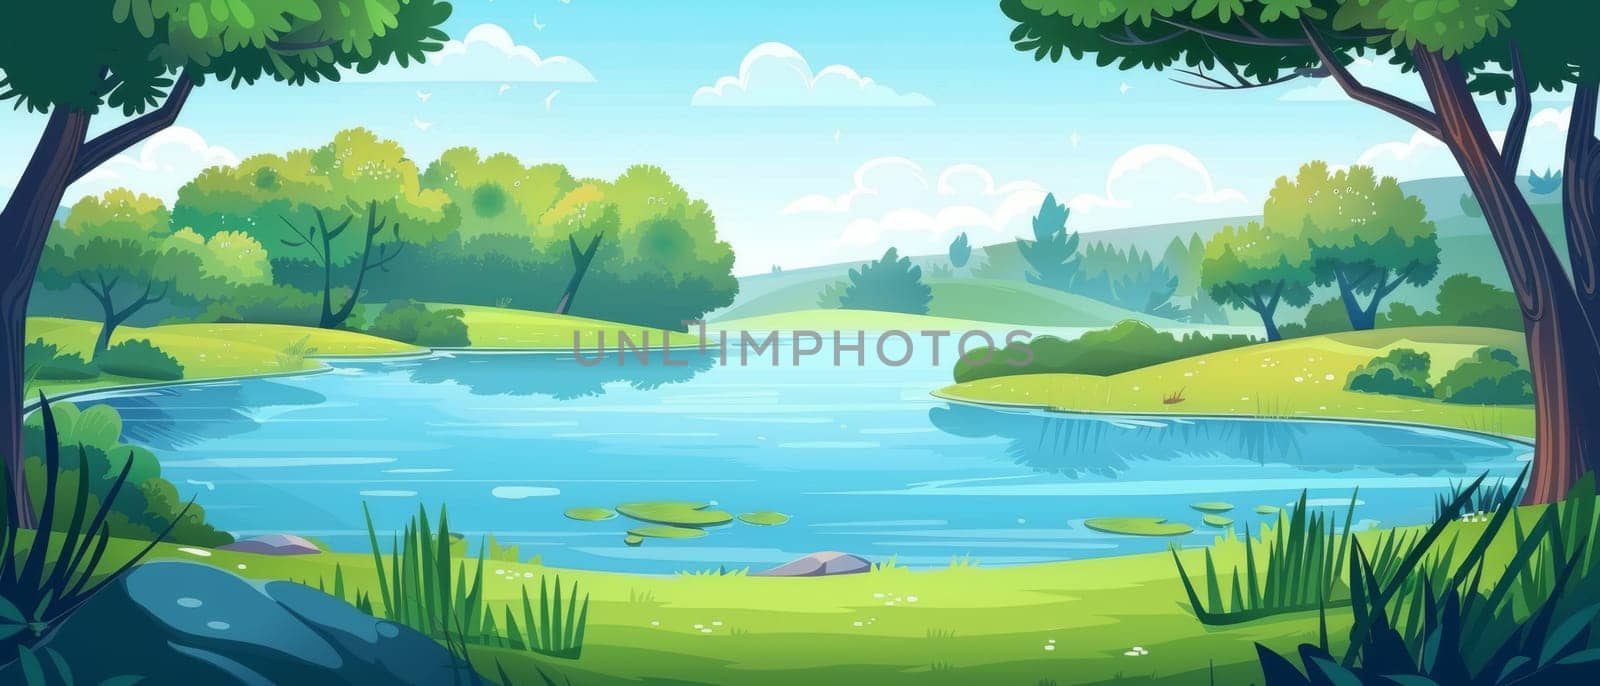 Cartoon modern summer forest landscape with lake. Small pond, bushes, trees and moss on the shore. Spring panorama nature scene of woodlands and reservoirs.